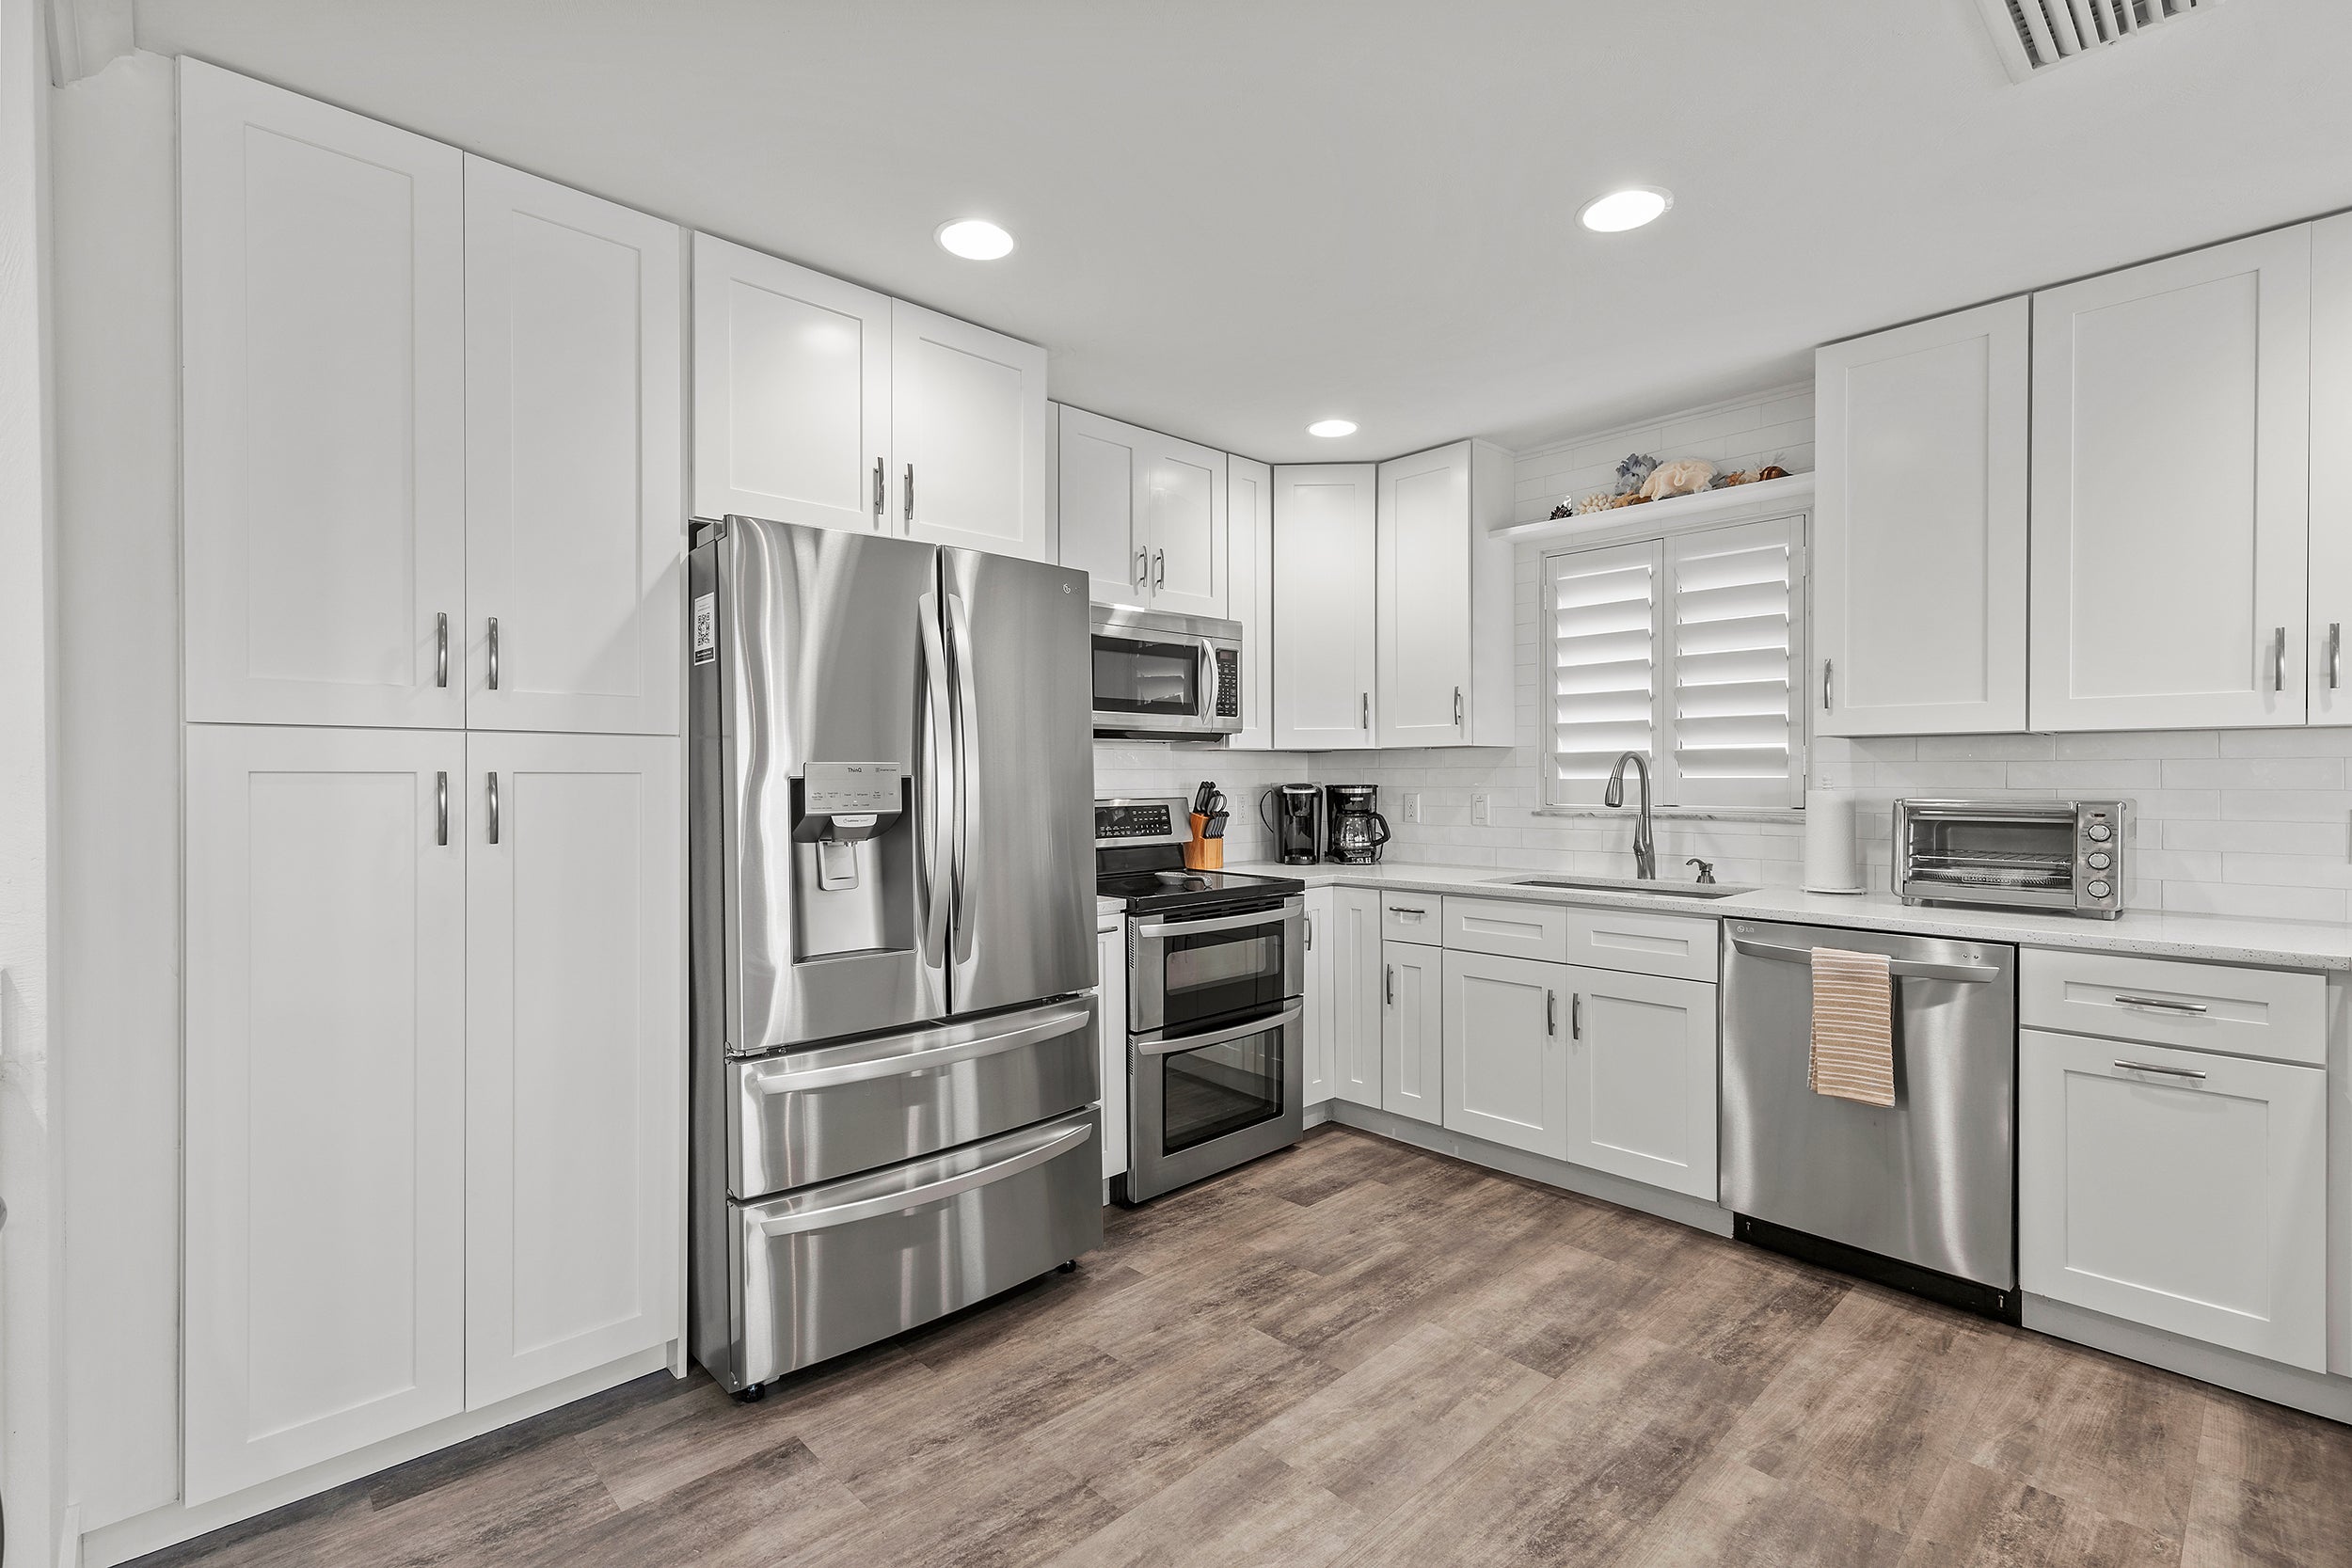 Fully Stocked Kitchen with Stainless Steel Appliances